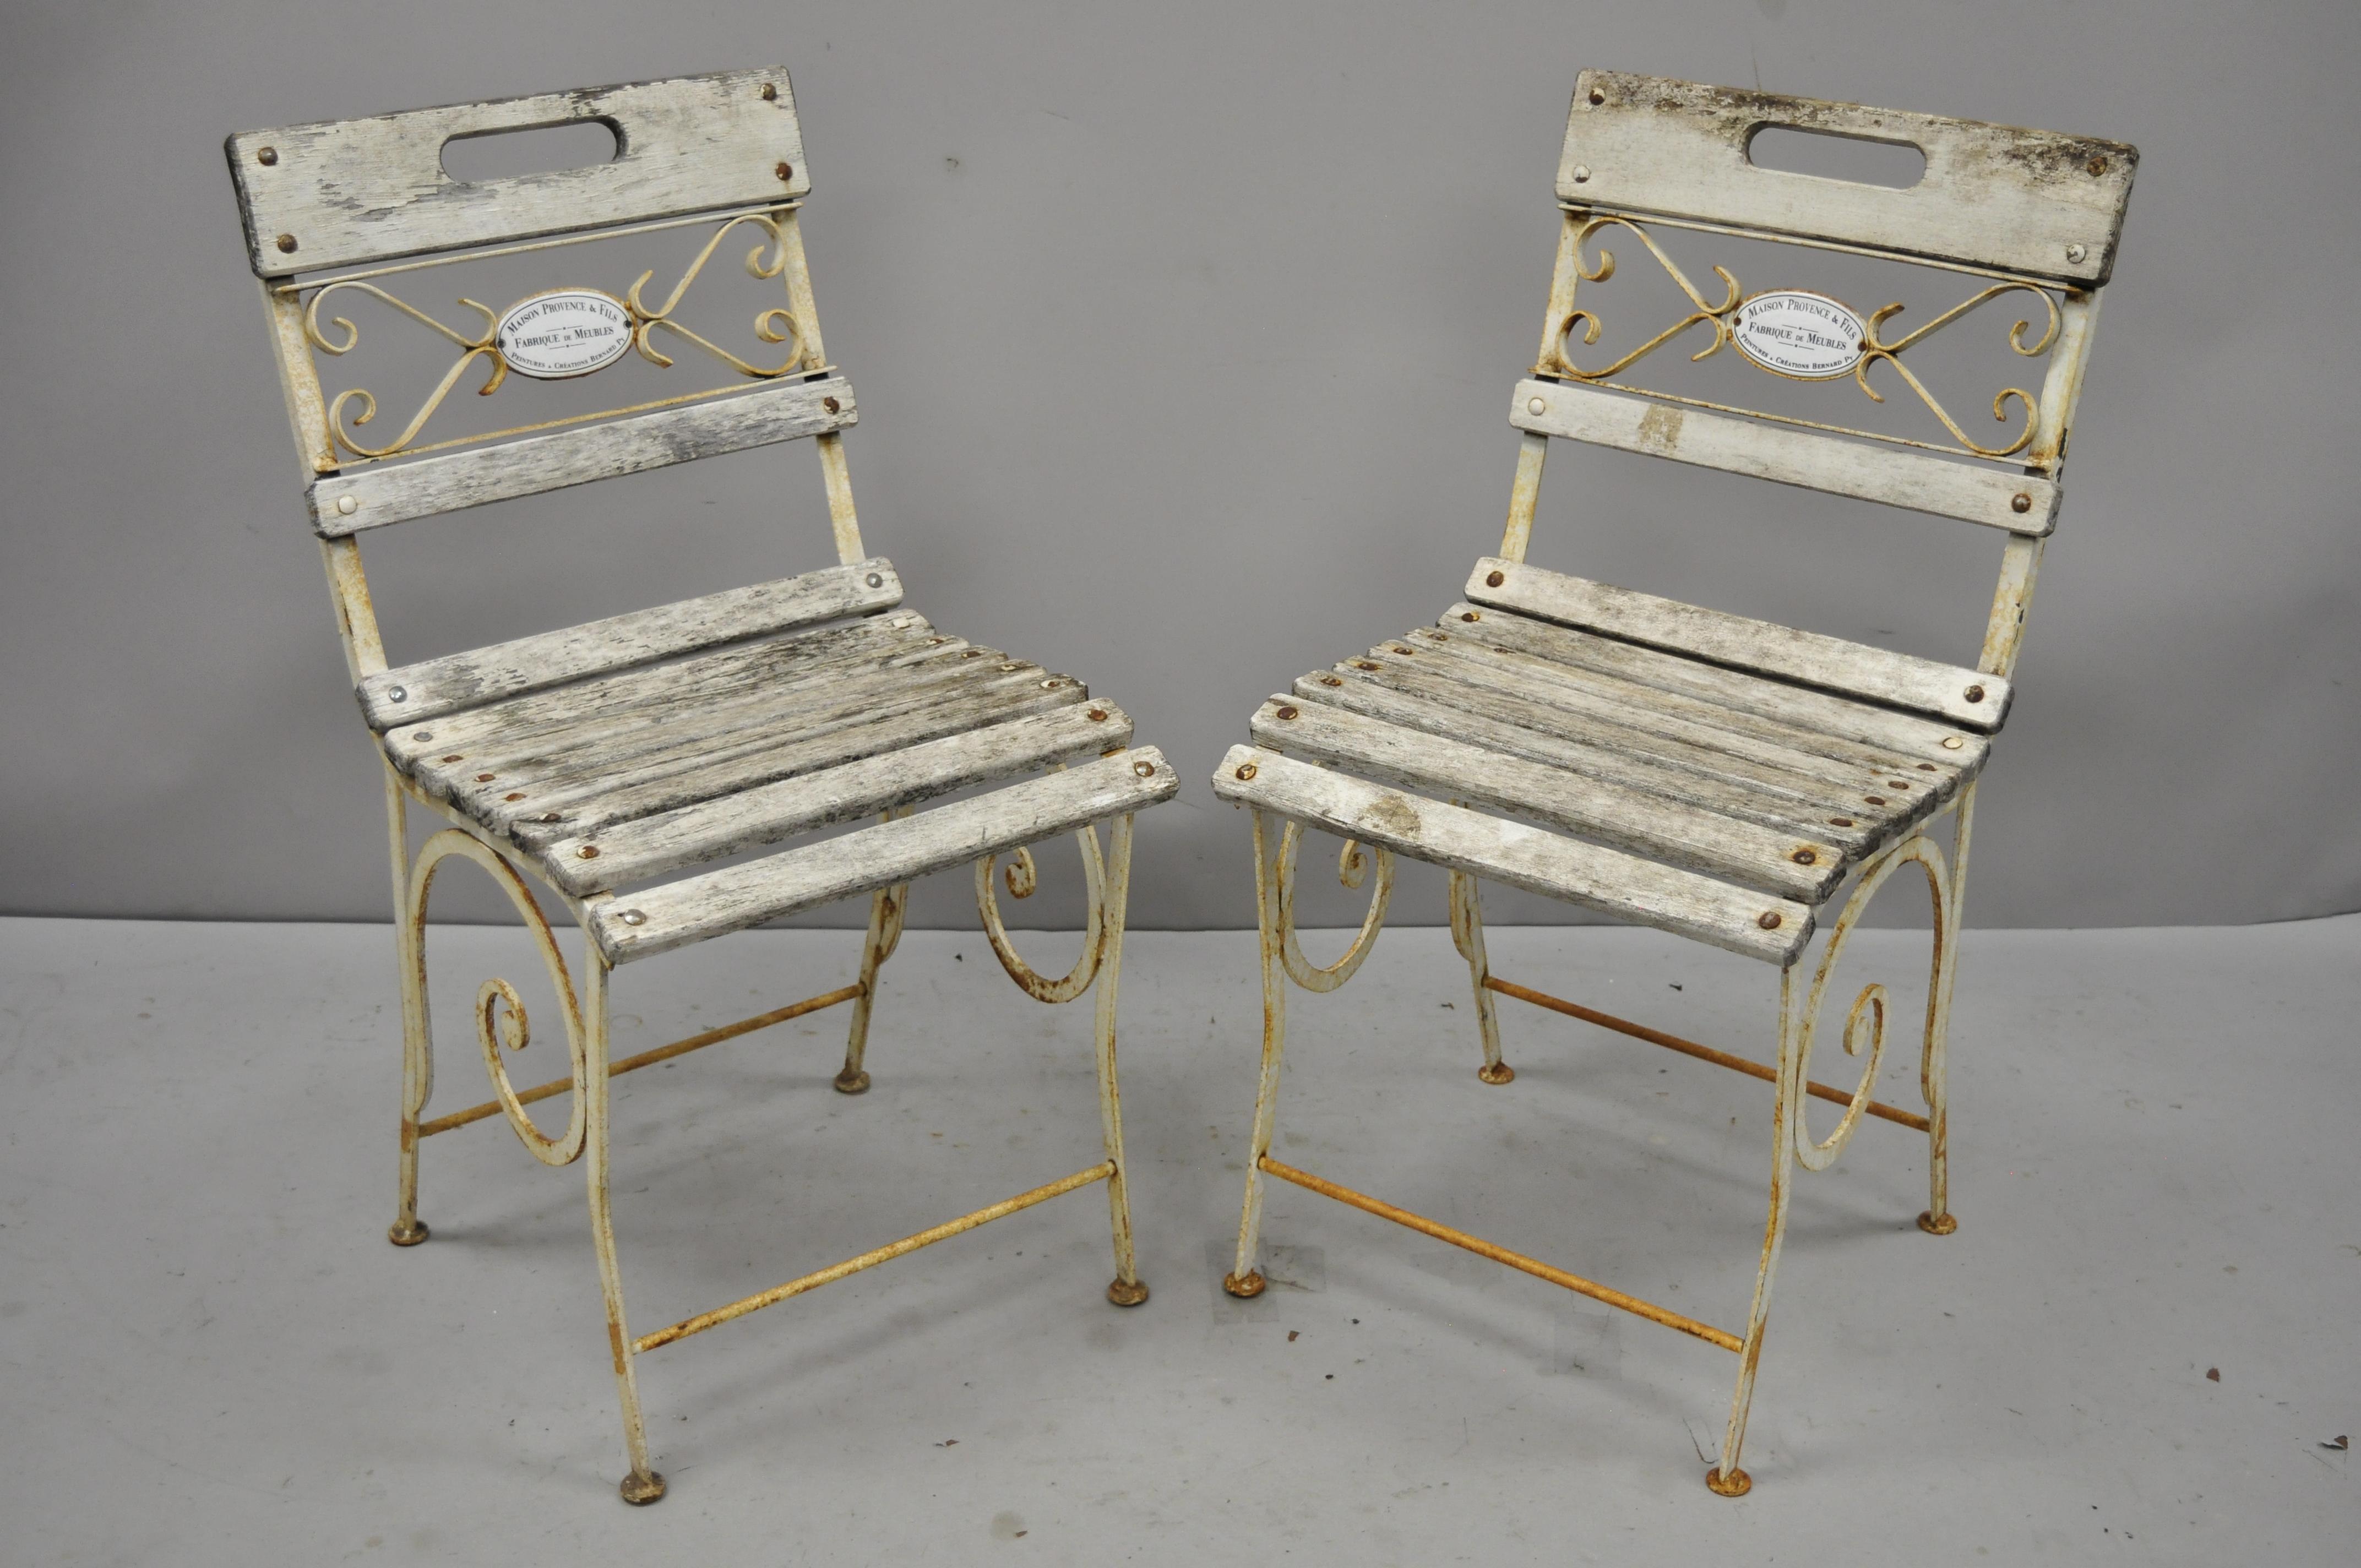 Set of four vintage French Victorian wrought iron and wooden slat seat patio side chairs by Maison Provence & Fils. Item features scrolling wrought iron frames, wooden slat seats, porcelain enamel plaque to back which reads 